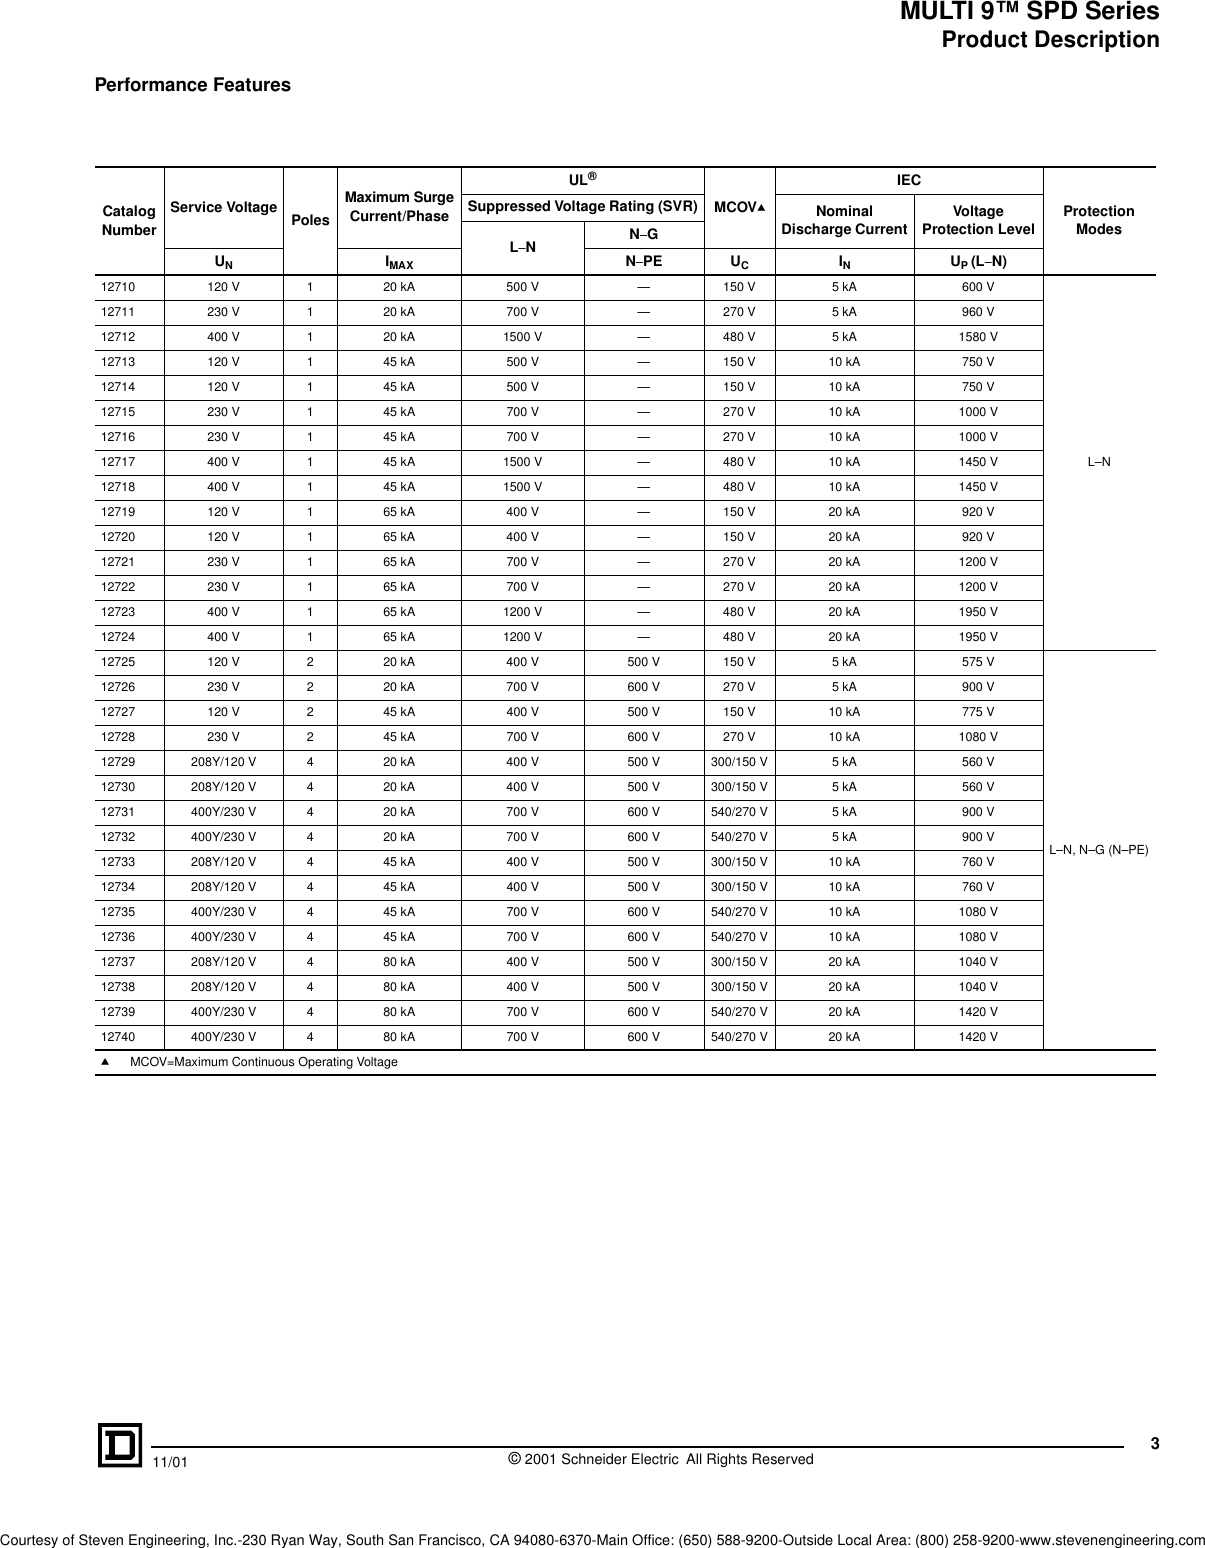 Page 3 of 8 - Surge Protective Device Transient Voltage Suppressor (TVSS) MULTI 9 SPD Series